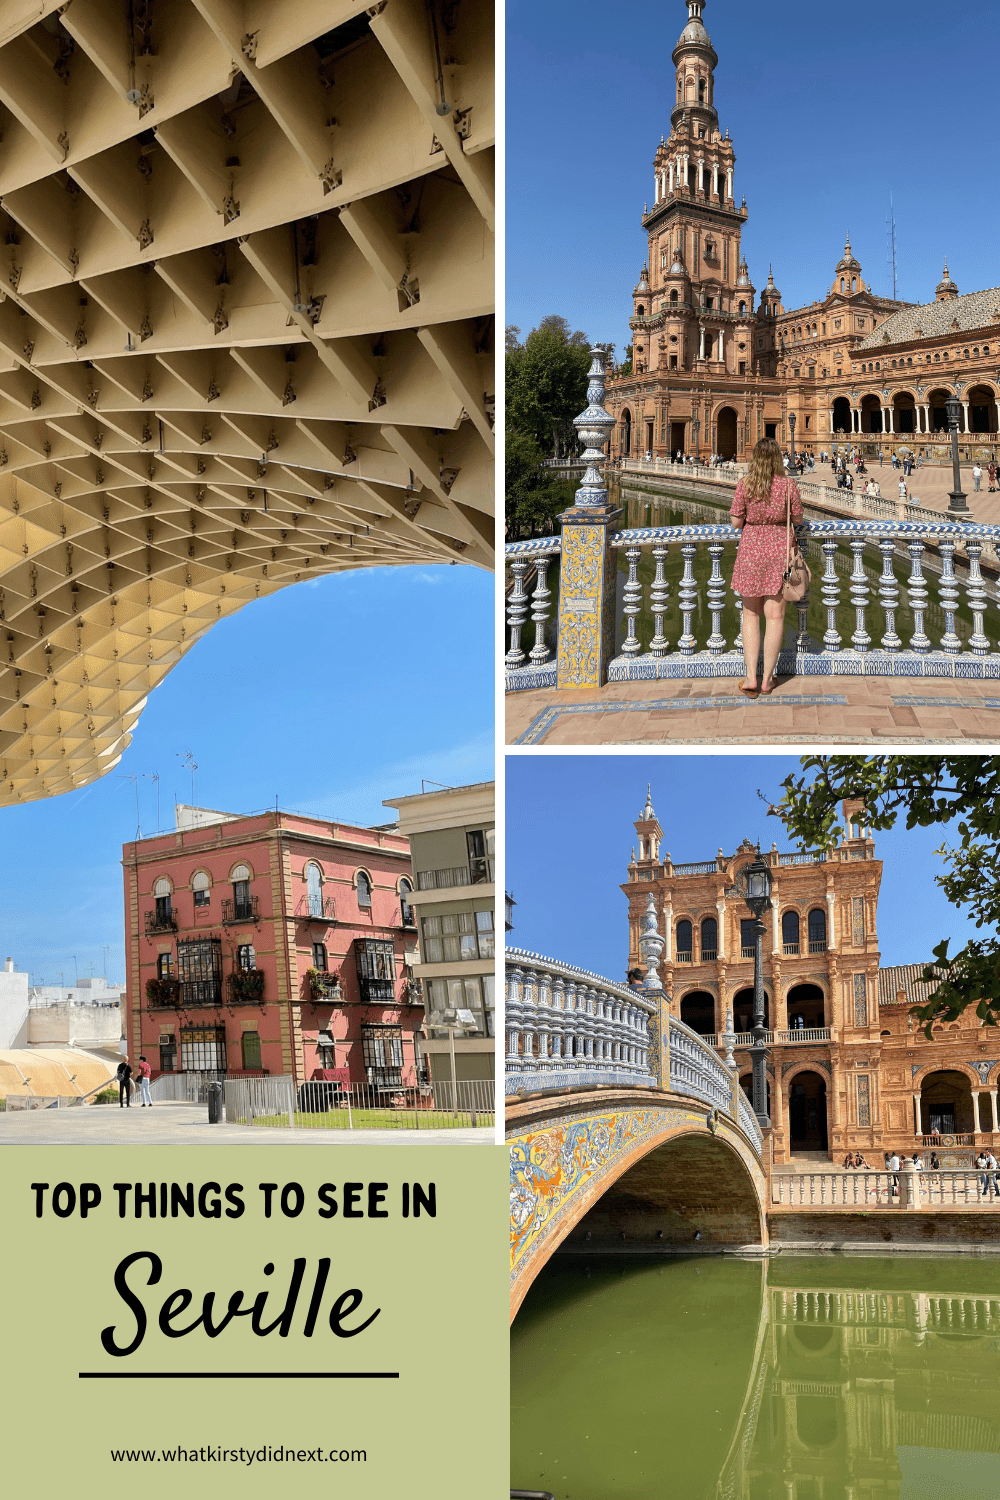 Top things to see in Seville 